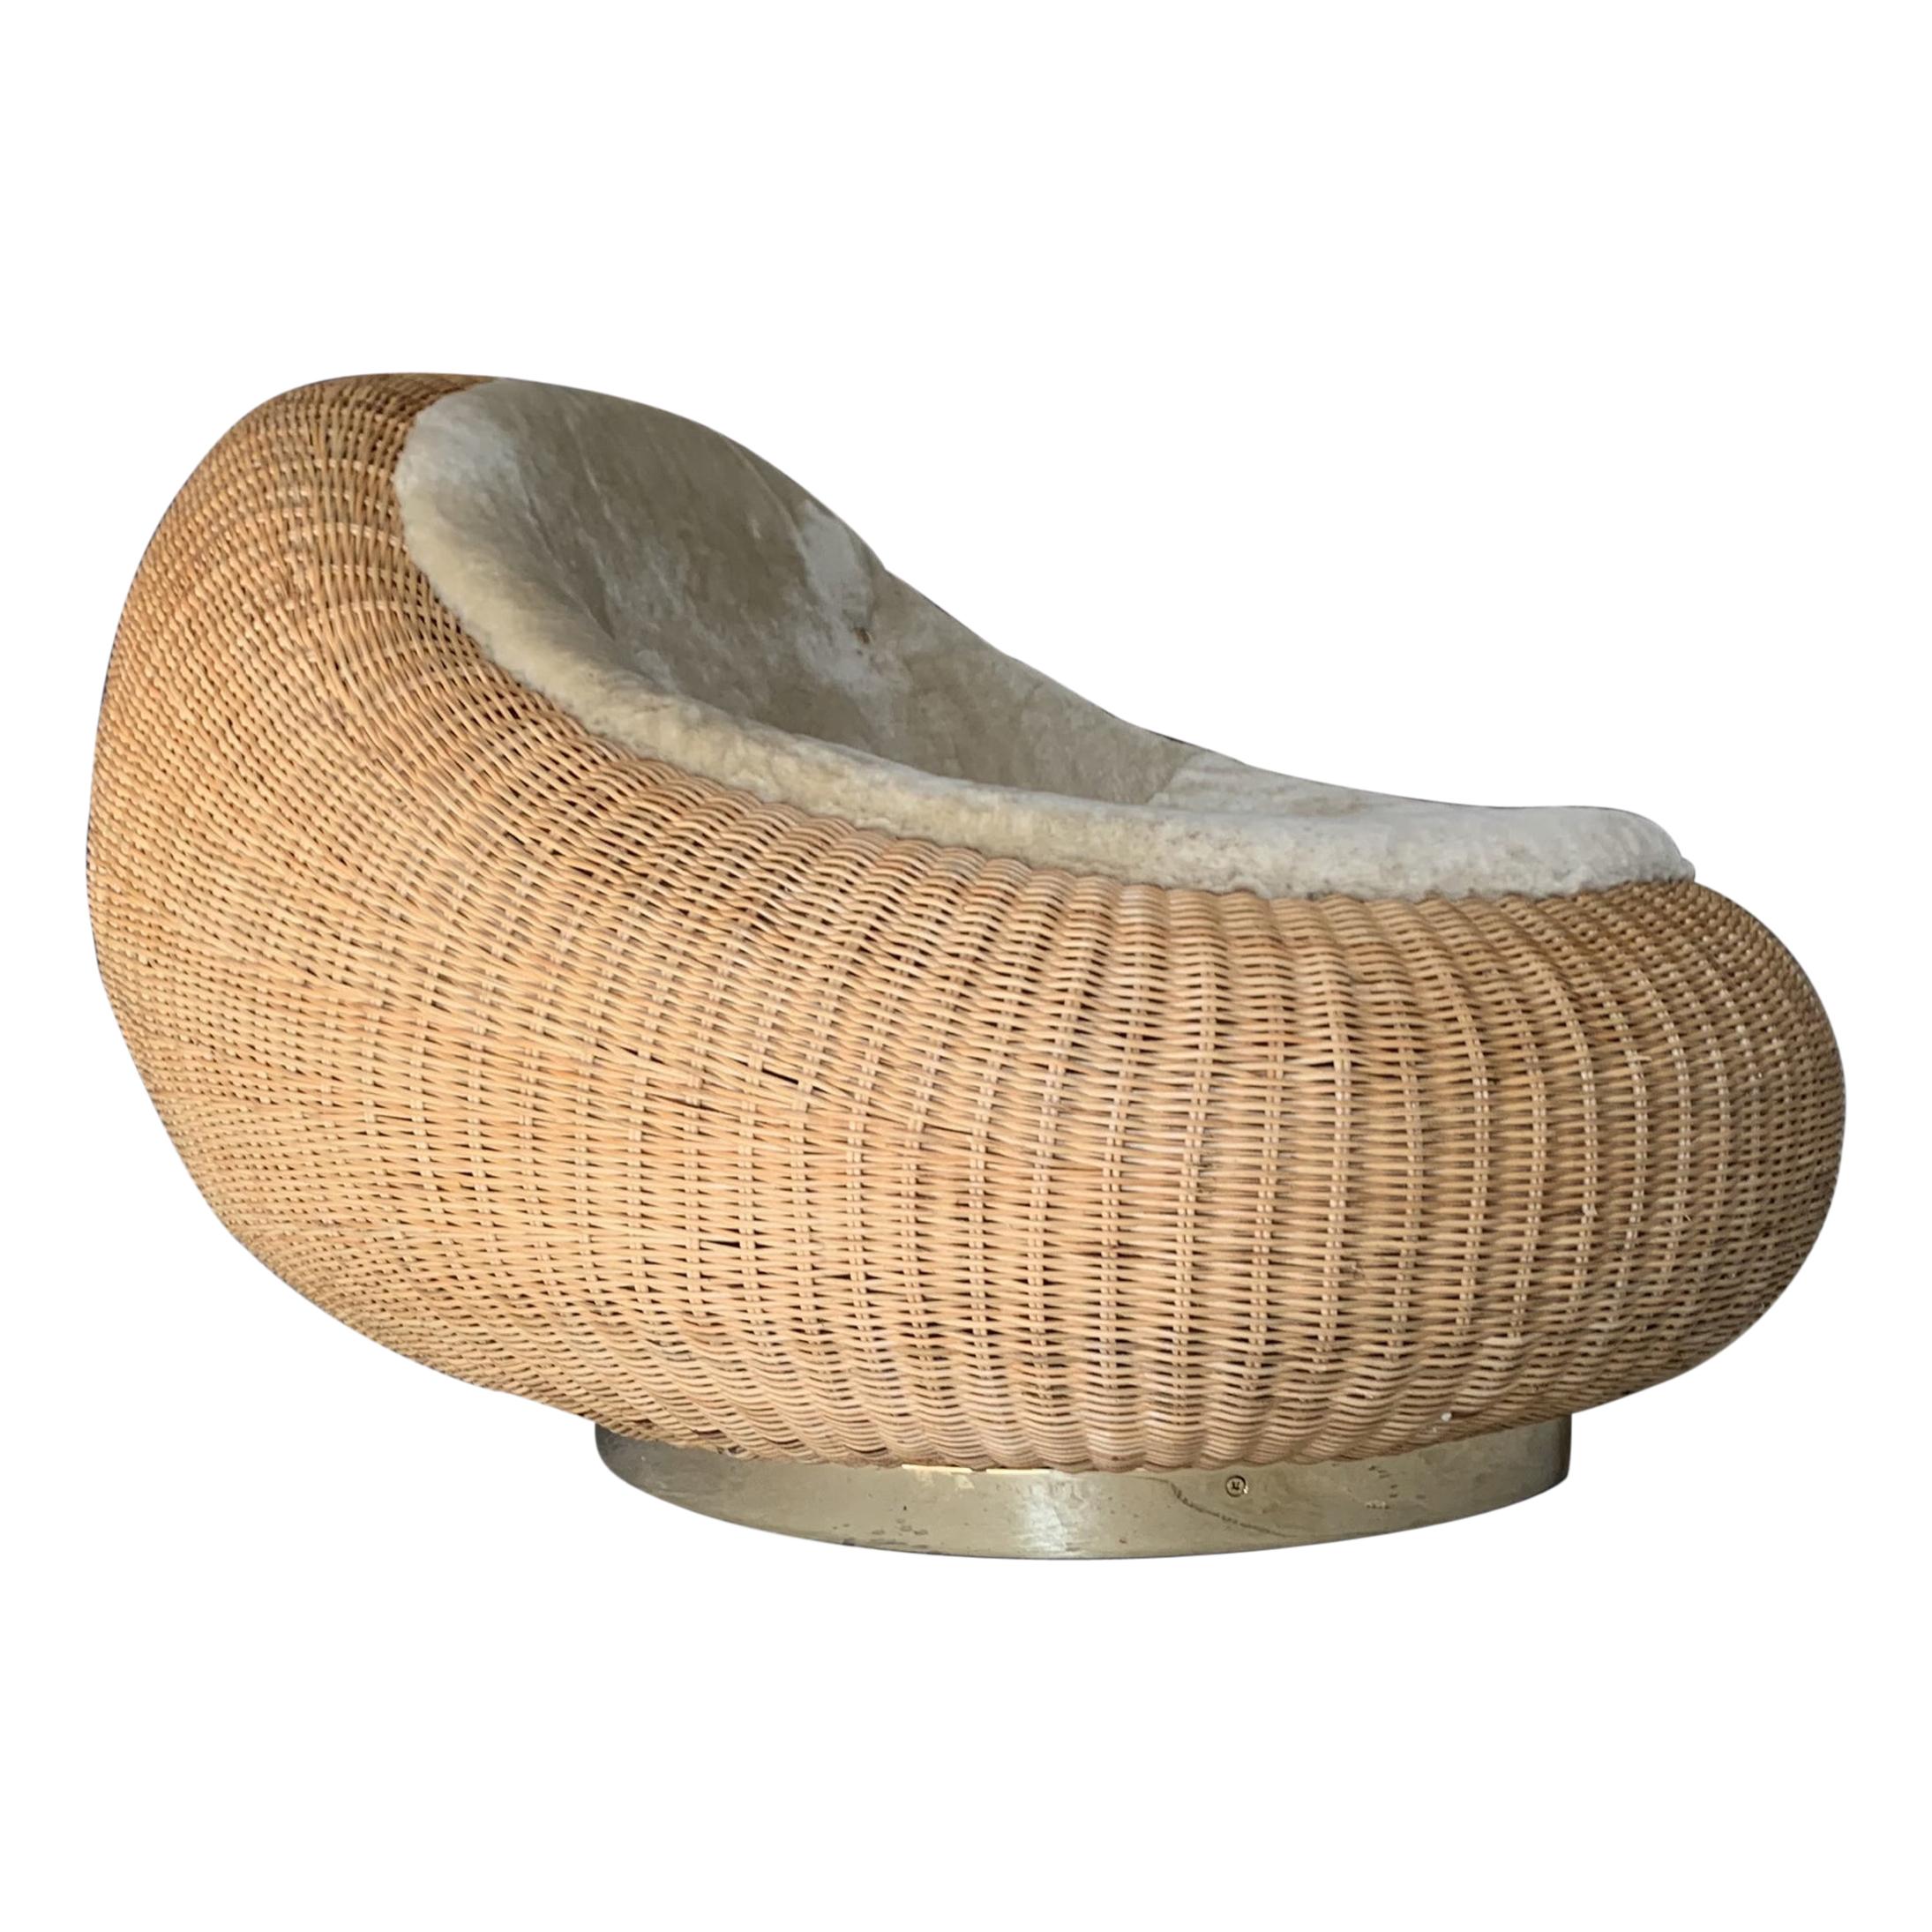 Woven Rattan Lounge Chair by Rogan Gregory